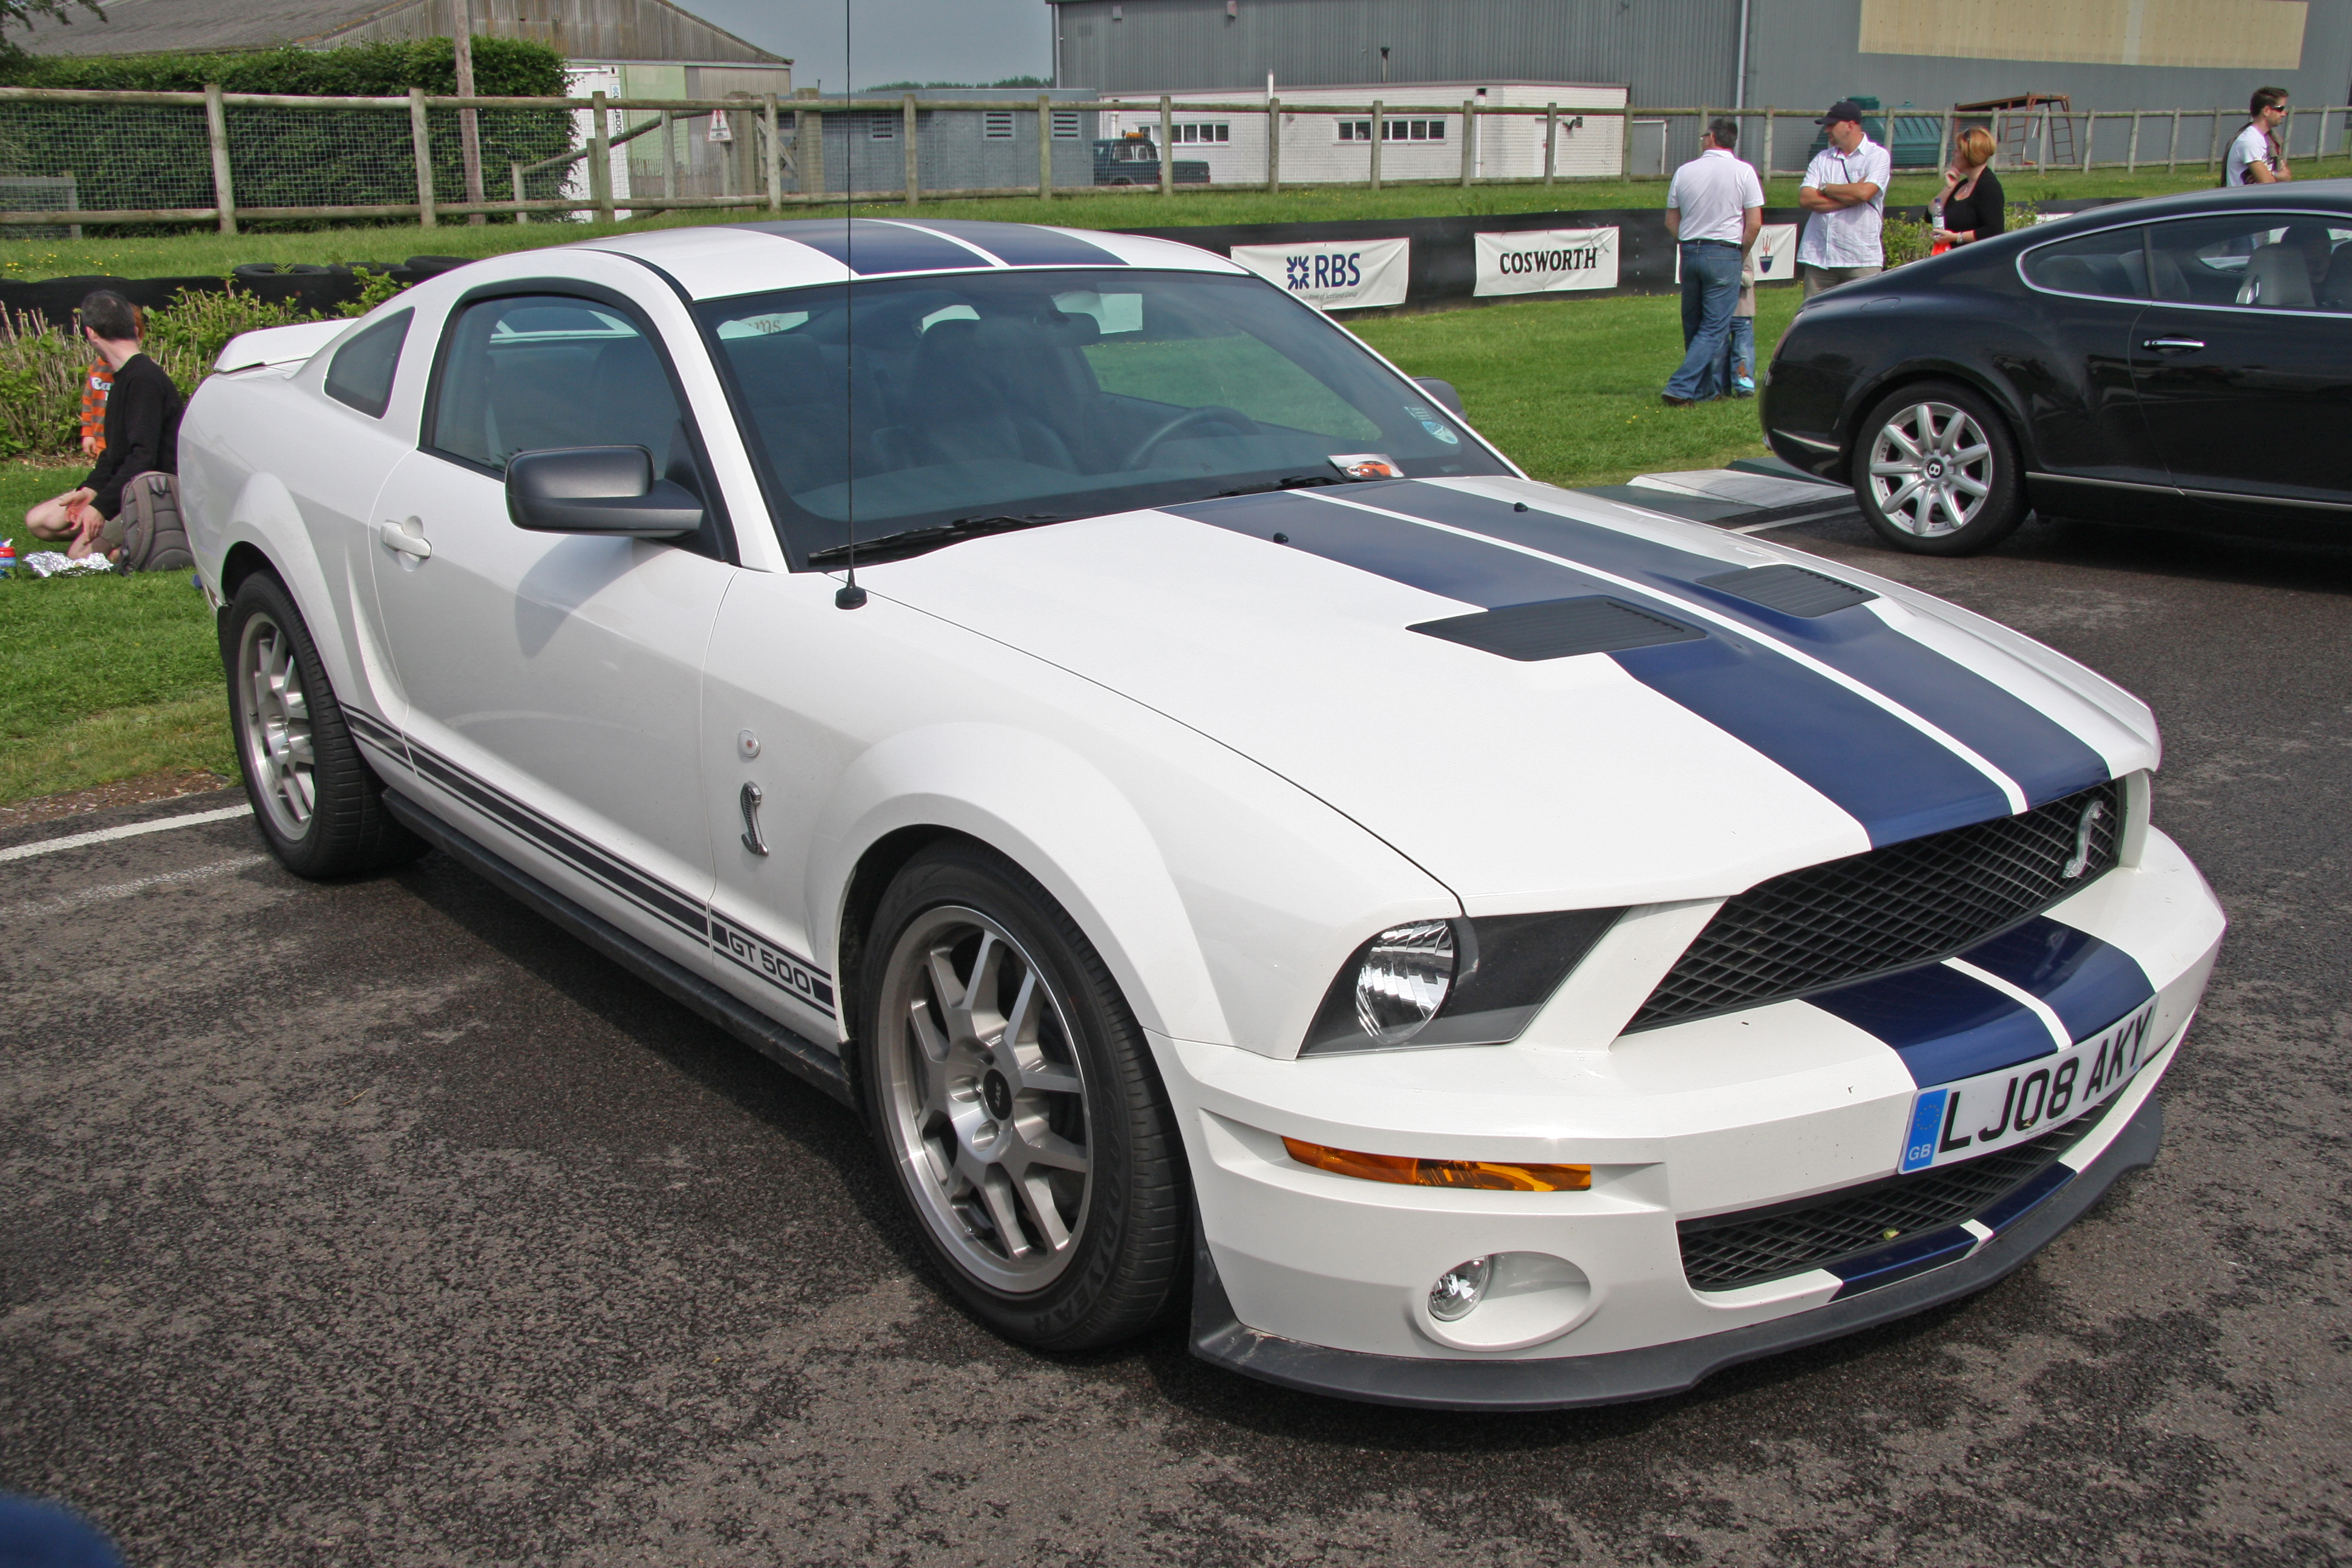 Fichier: Ford Mustang Shelby GT 500 - Flickr - exfordy.jpg - Wikimédia...